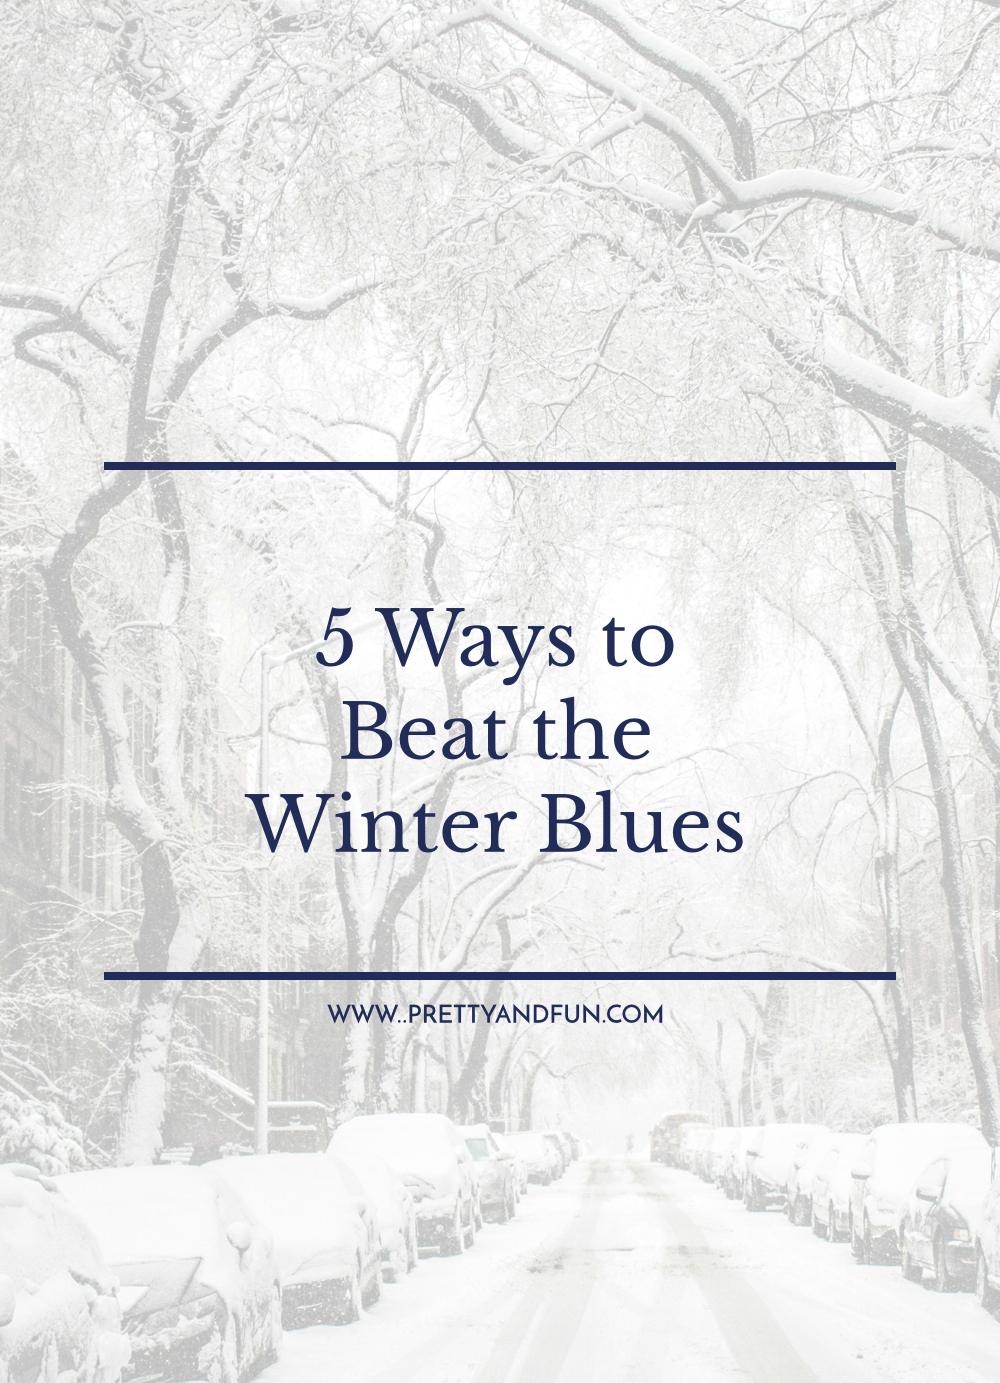 5 Ways to Beat the Winter Blues.